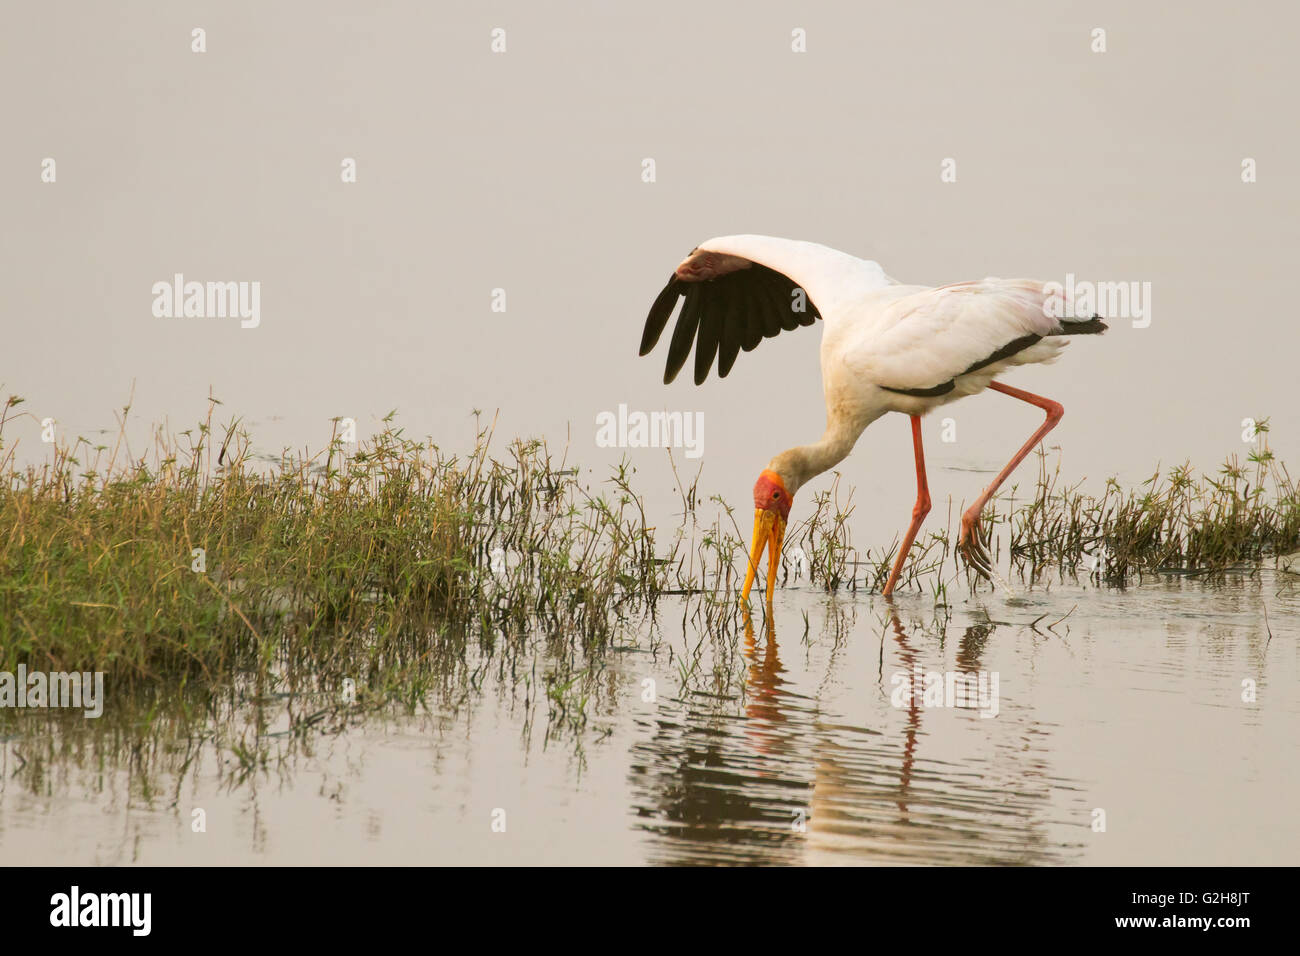 Yellow-billed Stork searching for prey in the water in the Chobe River in Chobe National Park, Botswana, Africa. Stock Photo